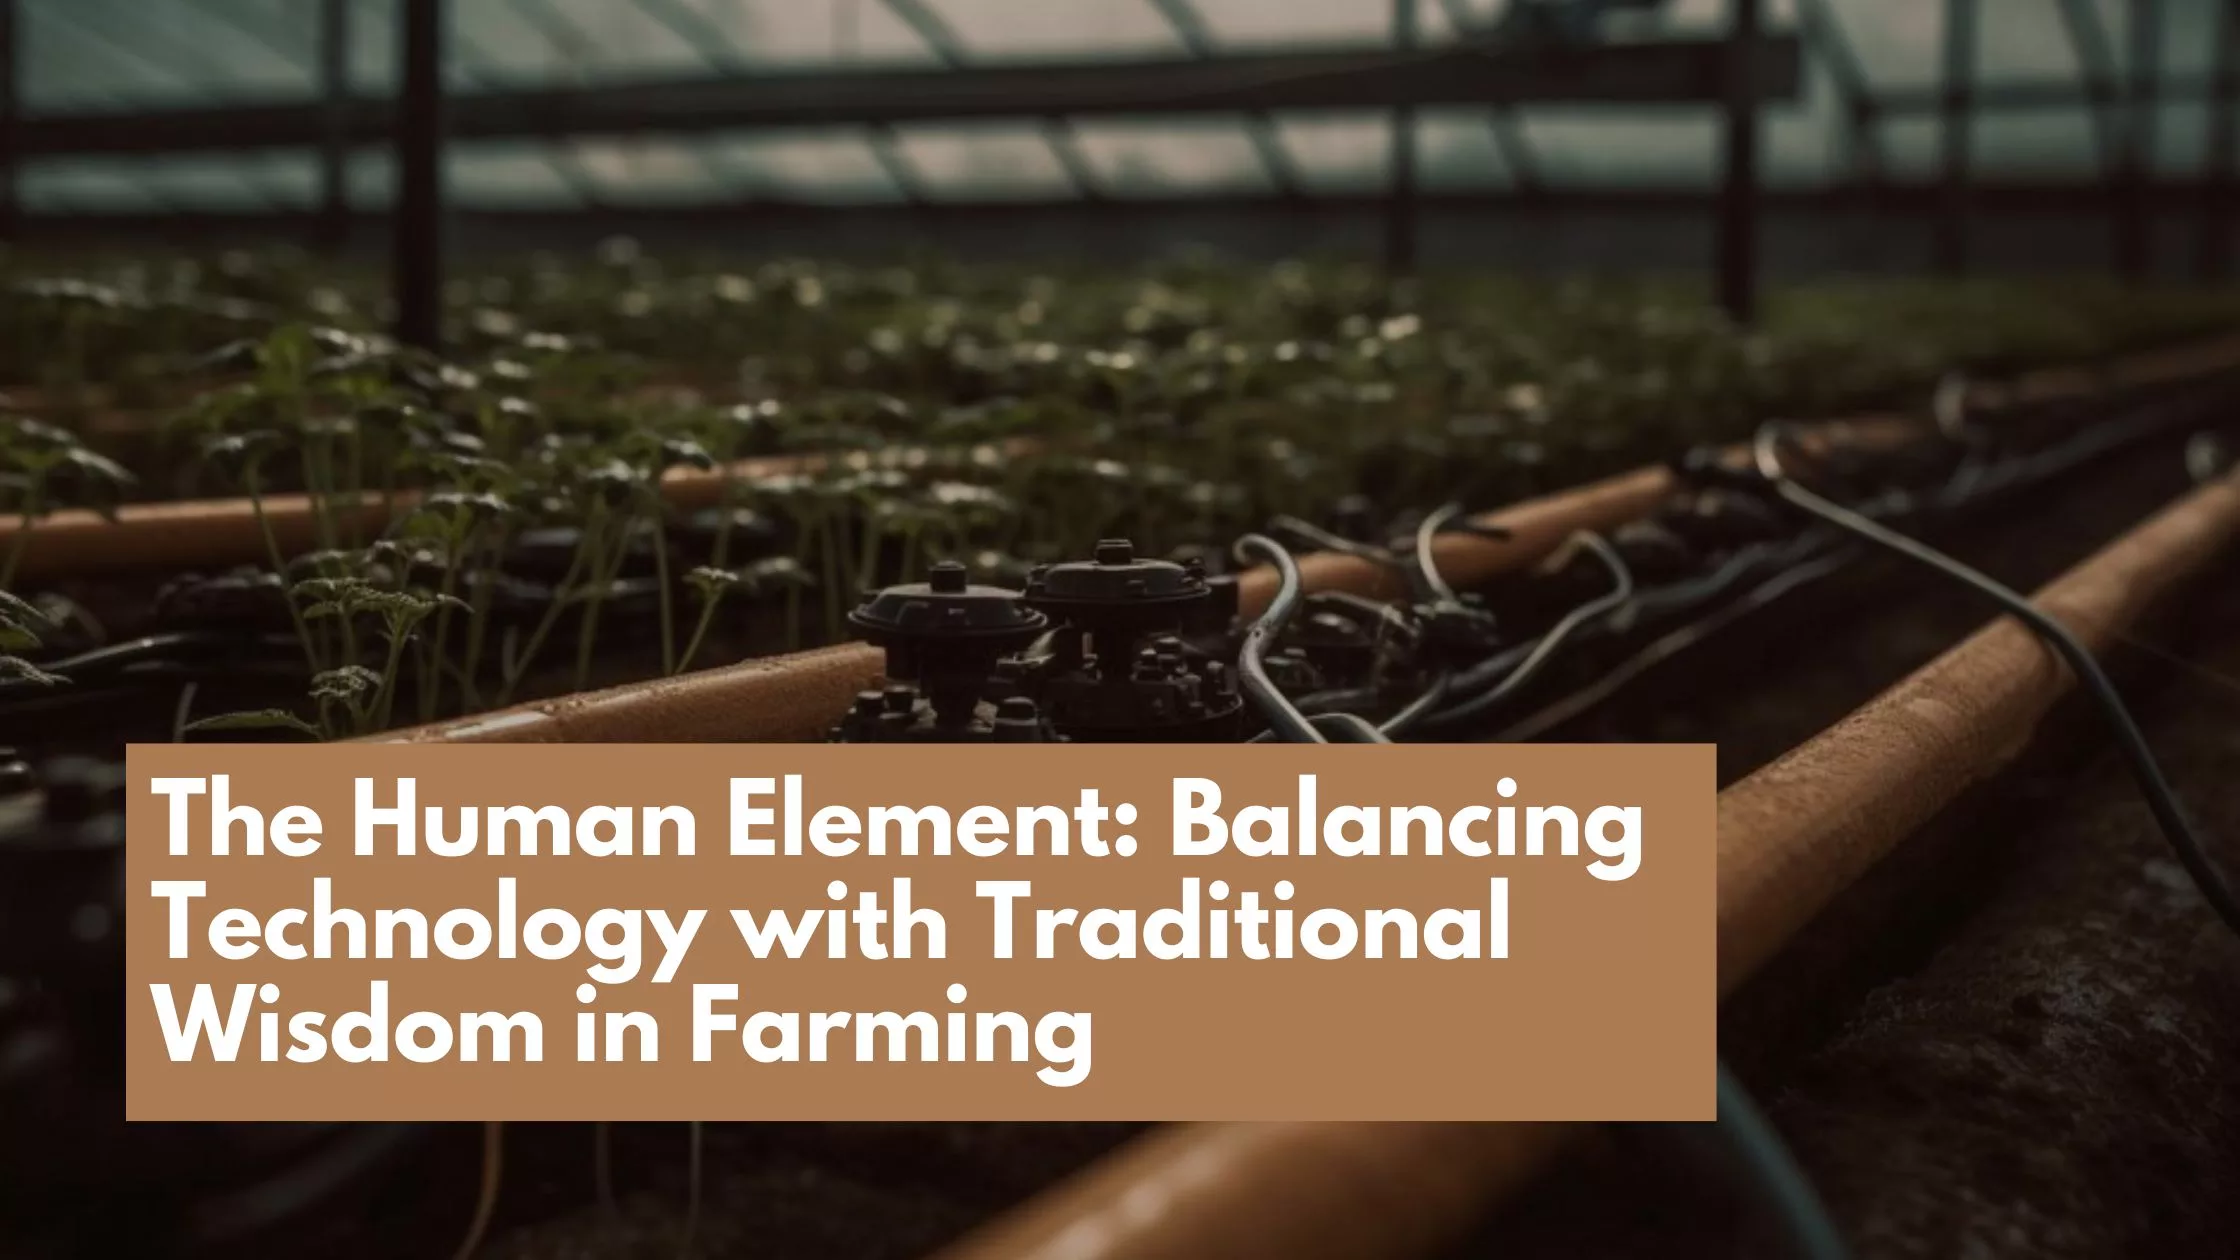 Balancing Technology with Traditional Wisdom in Farming